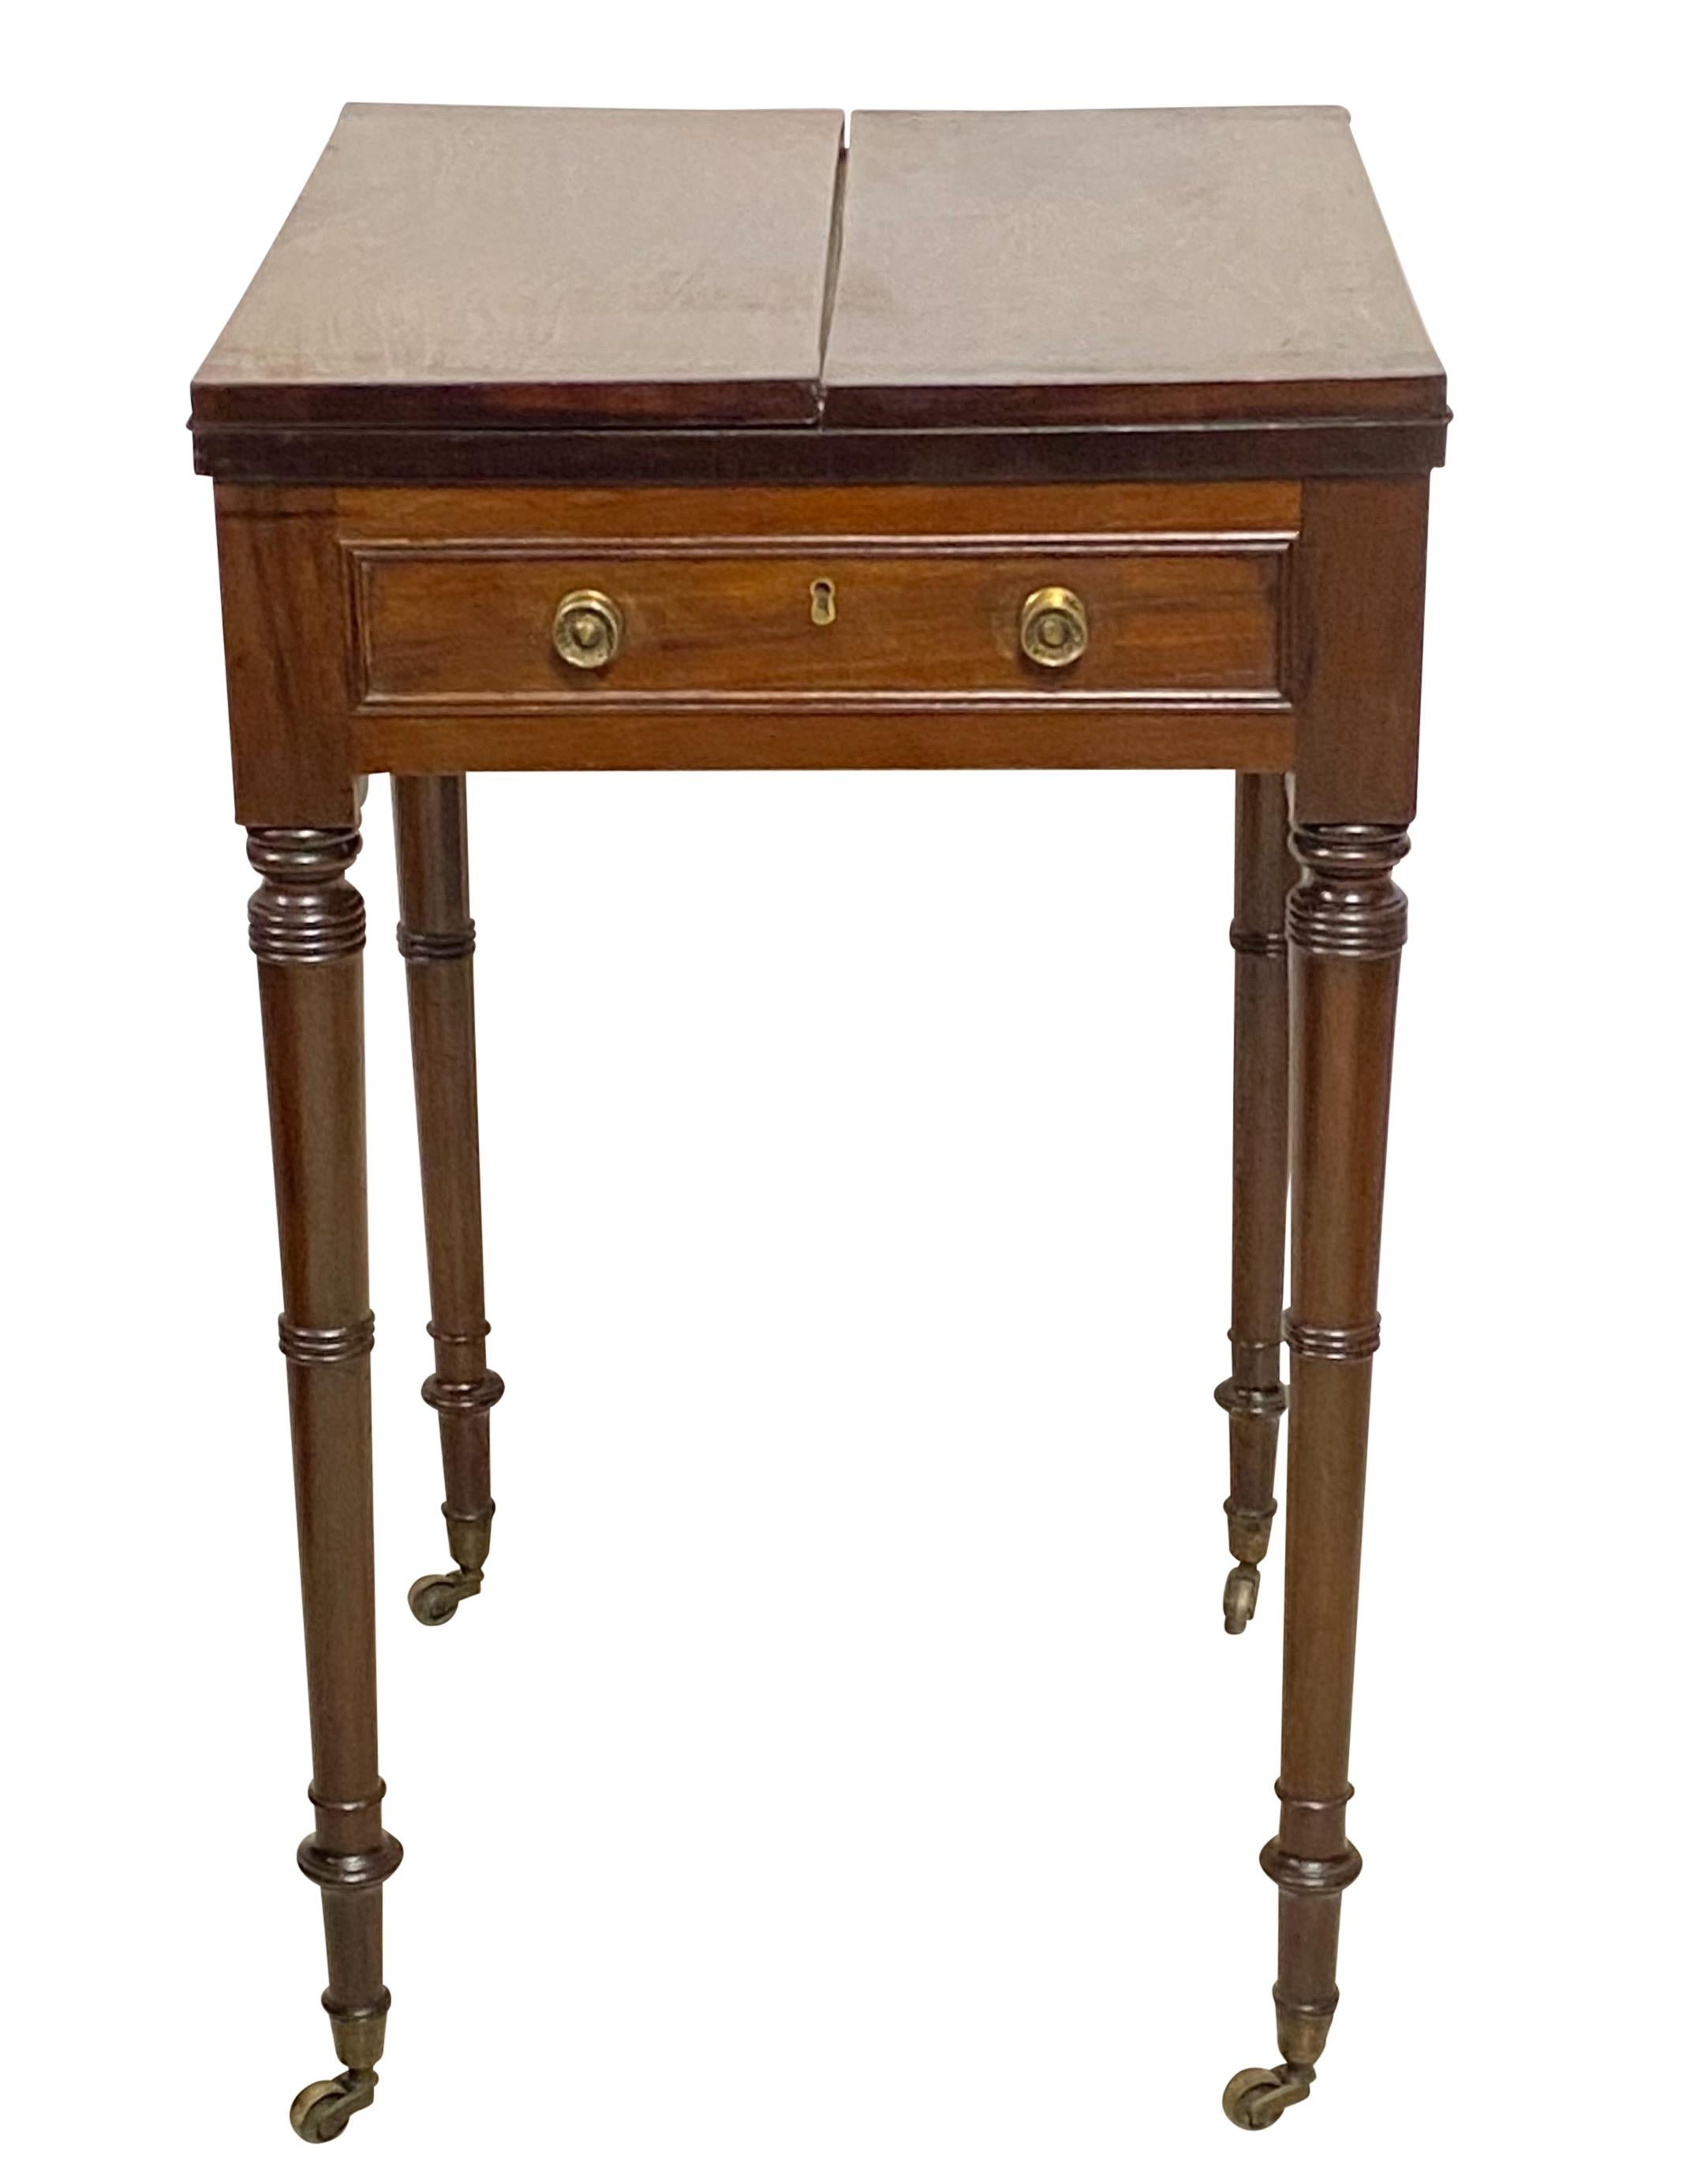 Regency Mahogany and Leather Side Table, English Early 19th Century For Sale 2